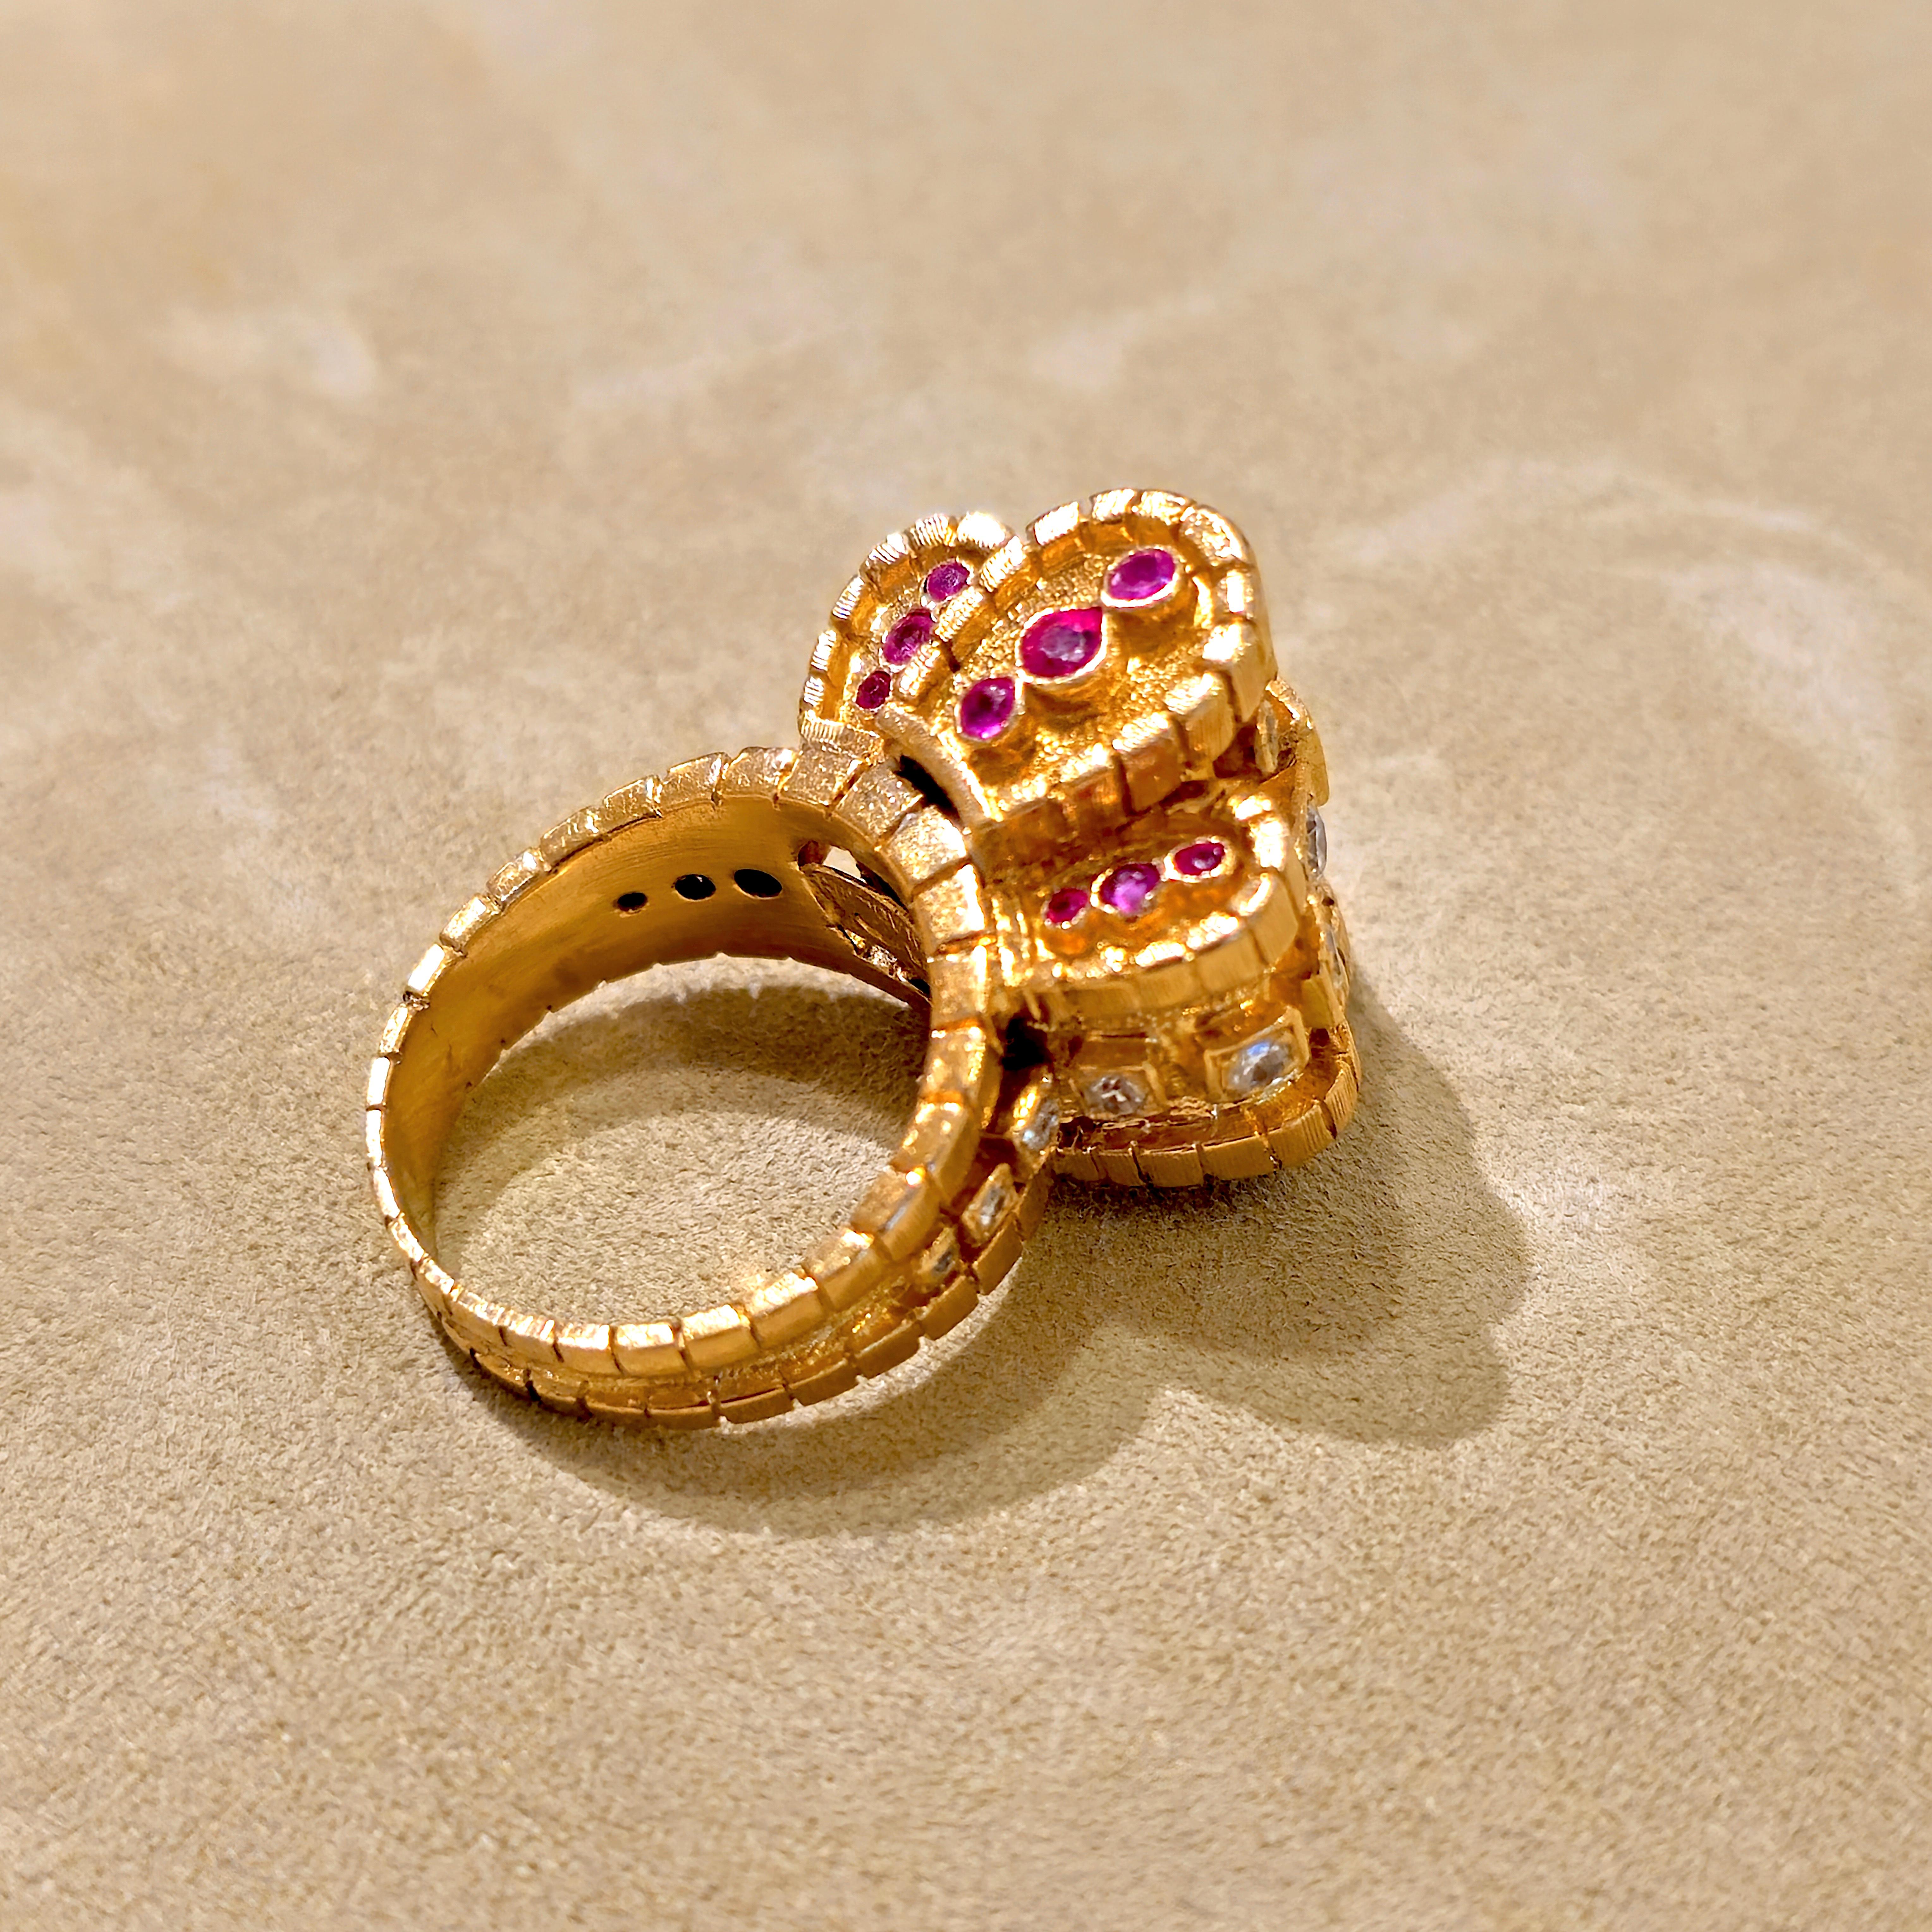 An early diamond, ruby, and 18-karat yellow gold cocktail ring by Ilias LALAoUNIS, Greece. This Ilias LALAoUNIS cocktail ring showcases a regal design with a  combination of sparkling full and single-cut diamonds of an estimated 1-carat total weight